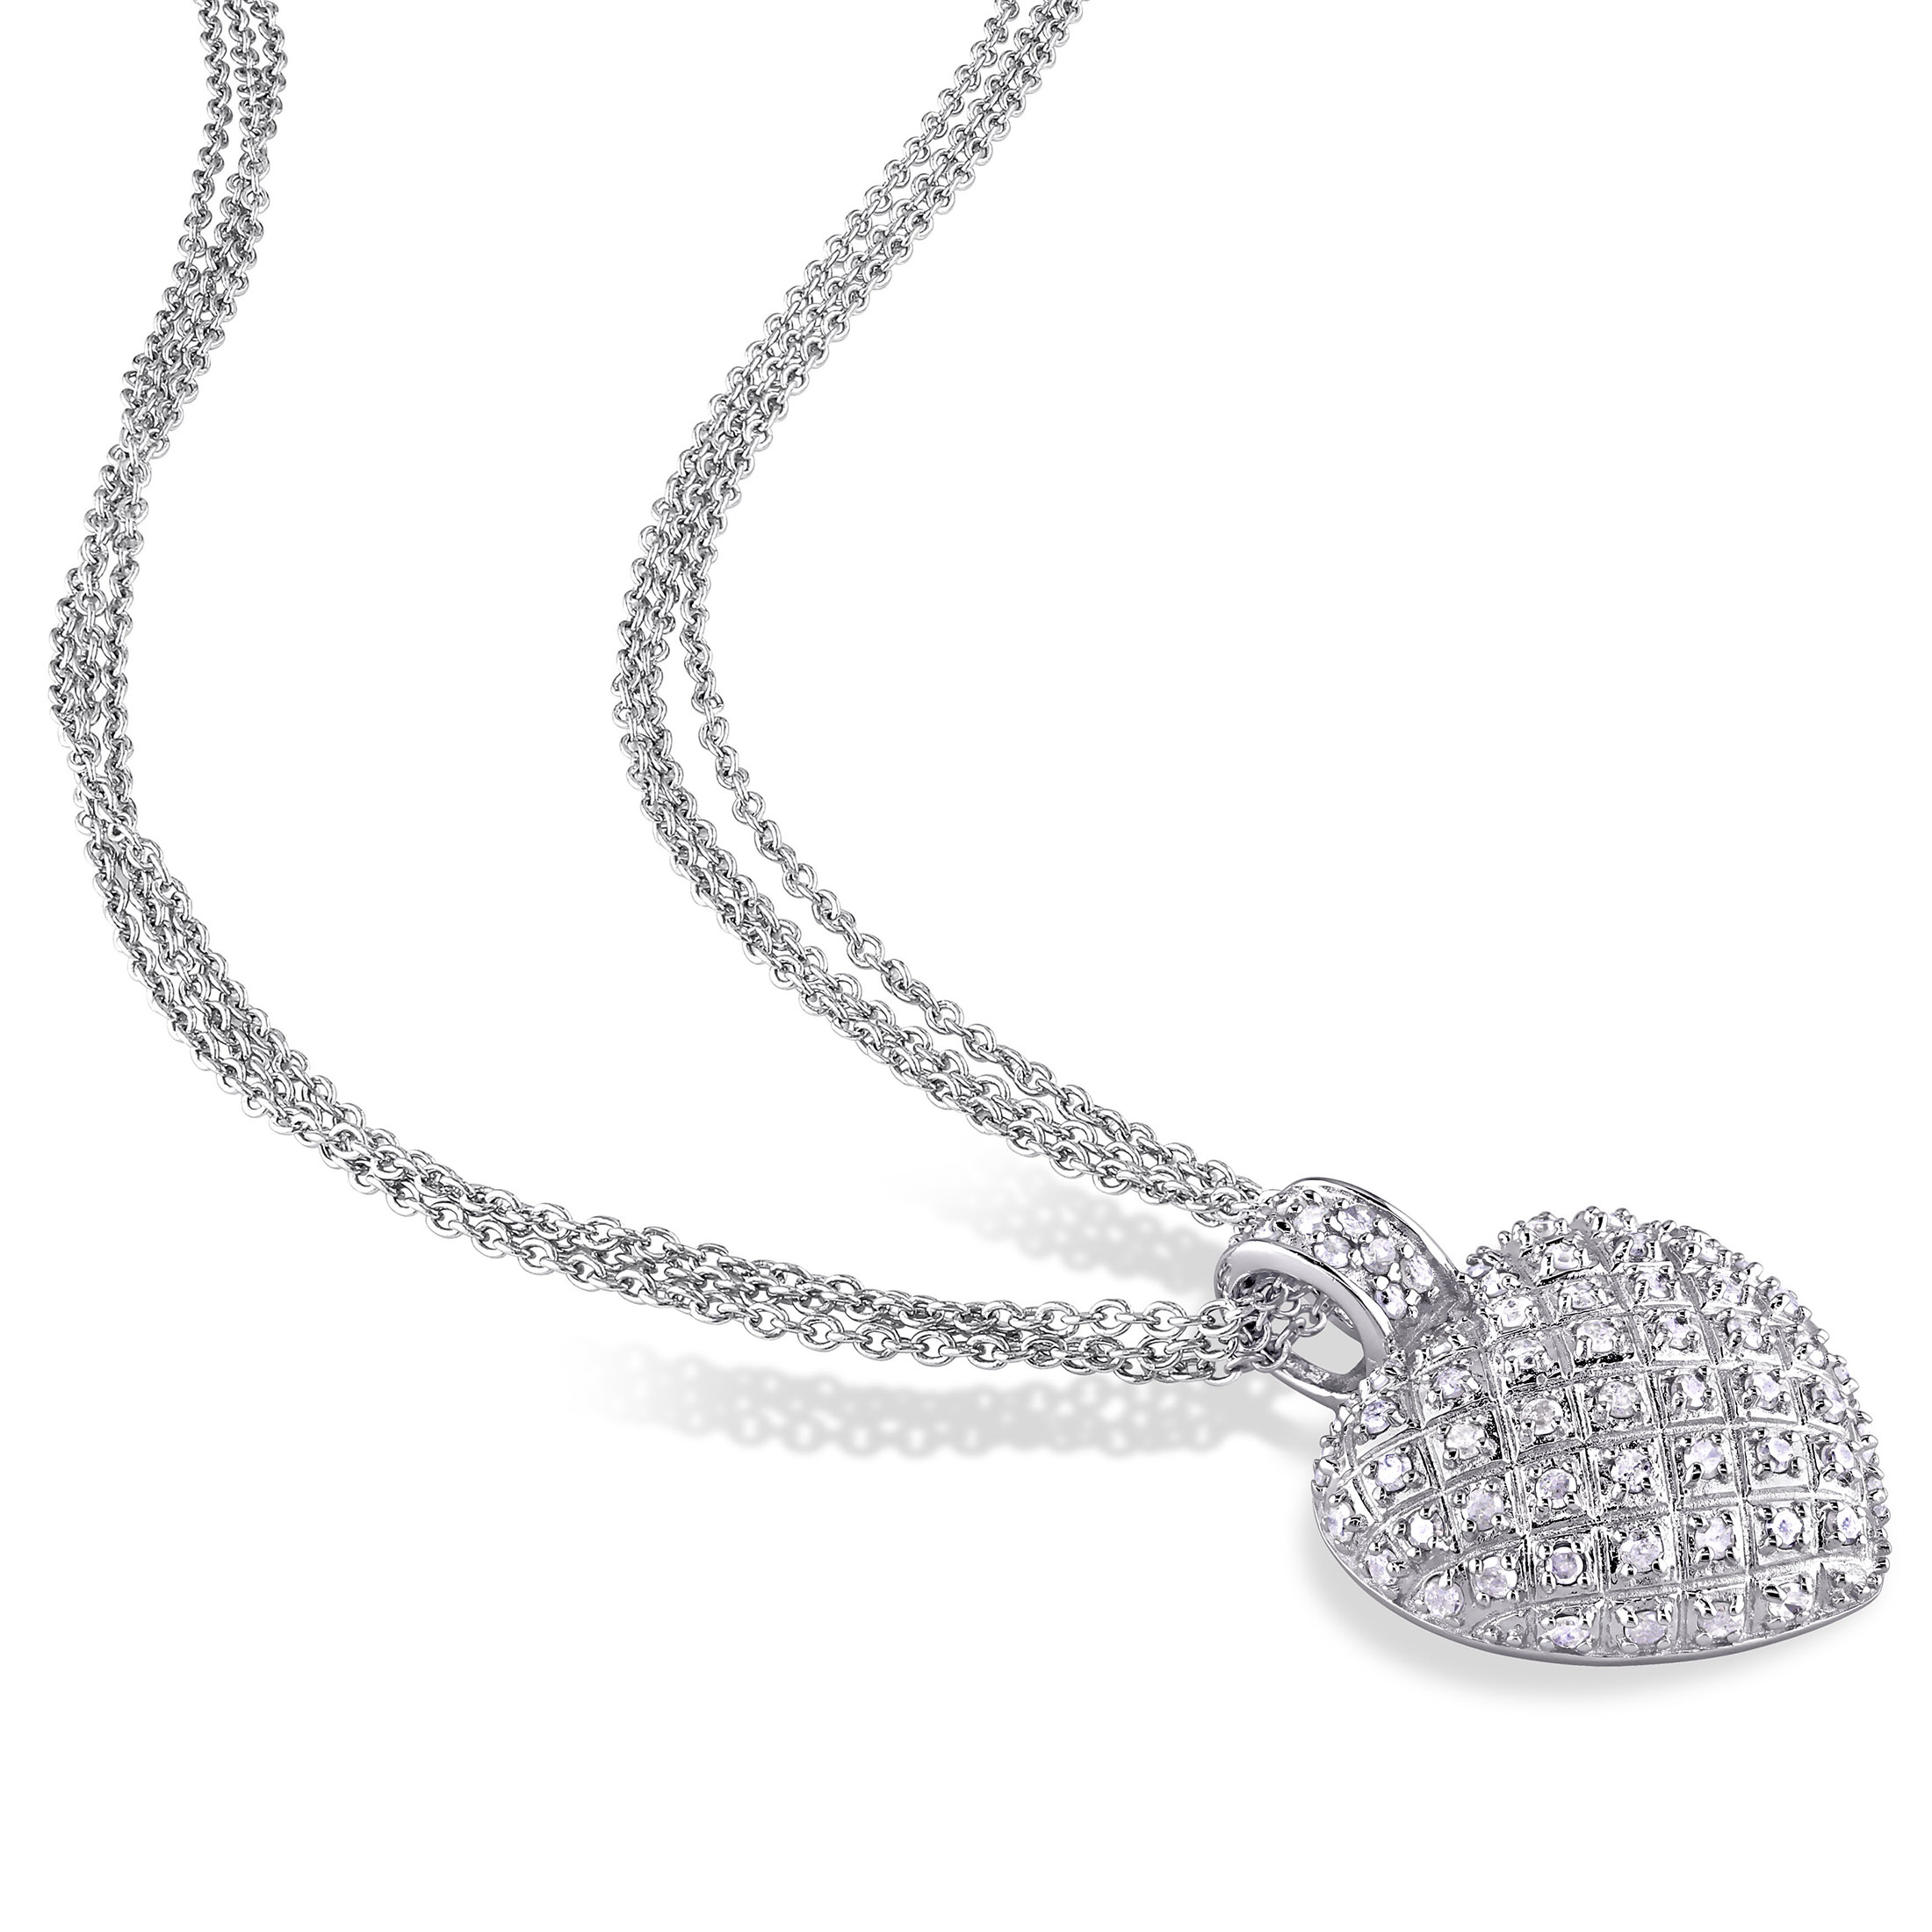 Everly Women's 1 Carat T.W. Round-Cut Diamond Sterling Silver Clustered Heart Necklace with Pave Setting and Lobster Clasp (H-I-J, I3) - 17 in. - image 5 of 8